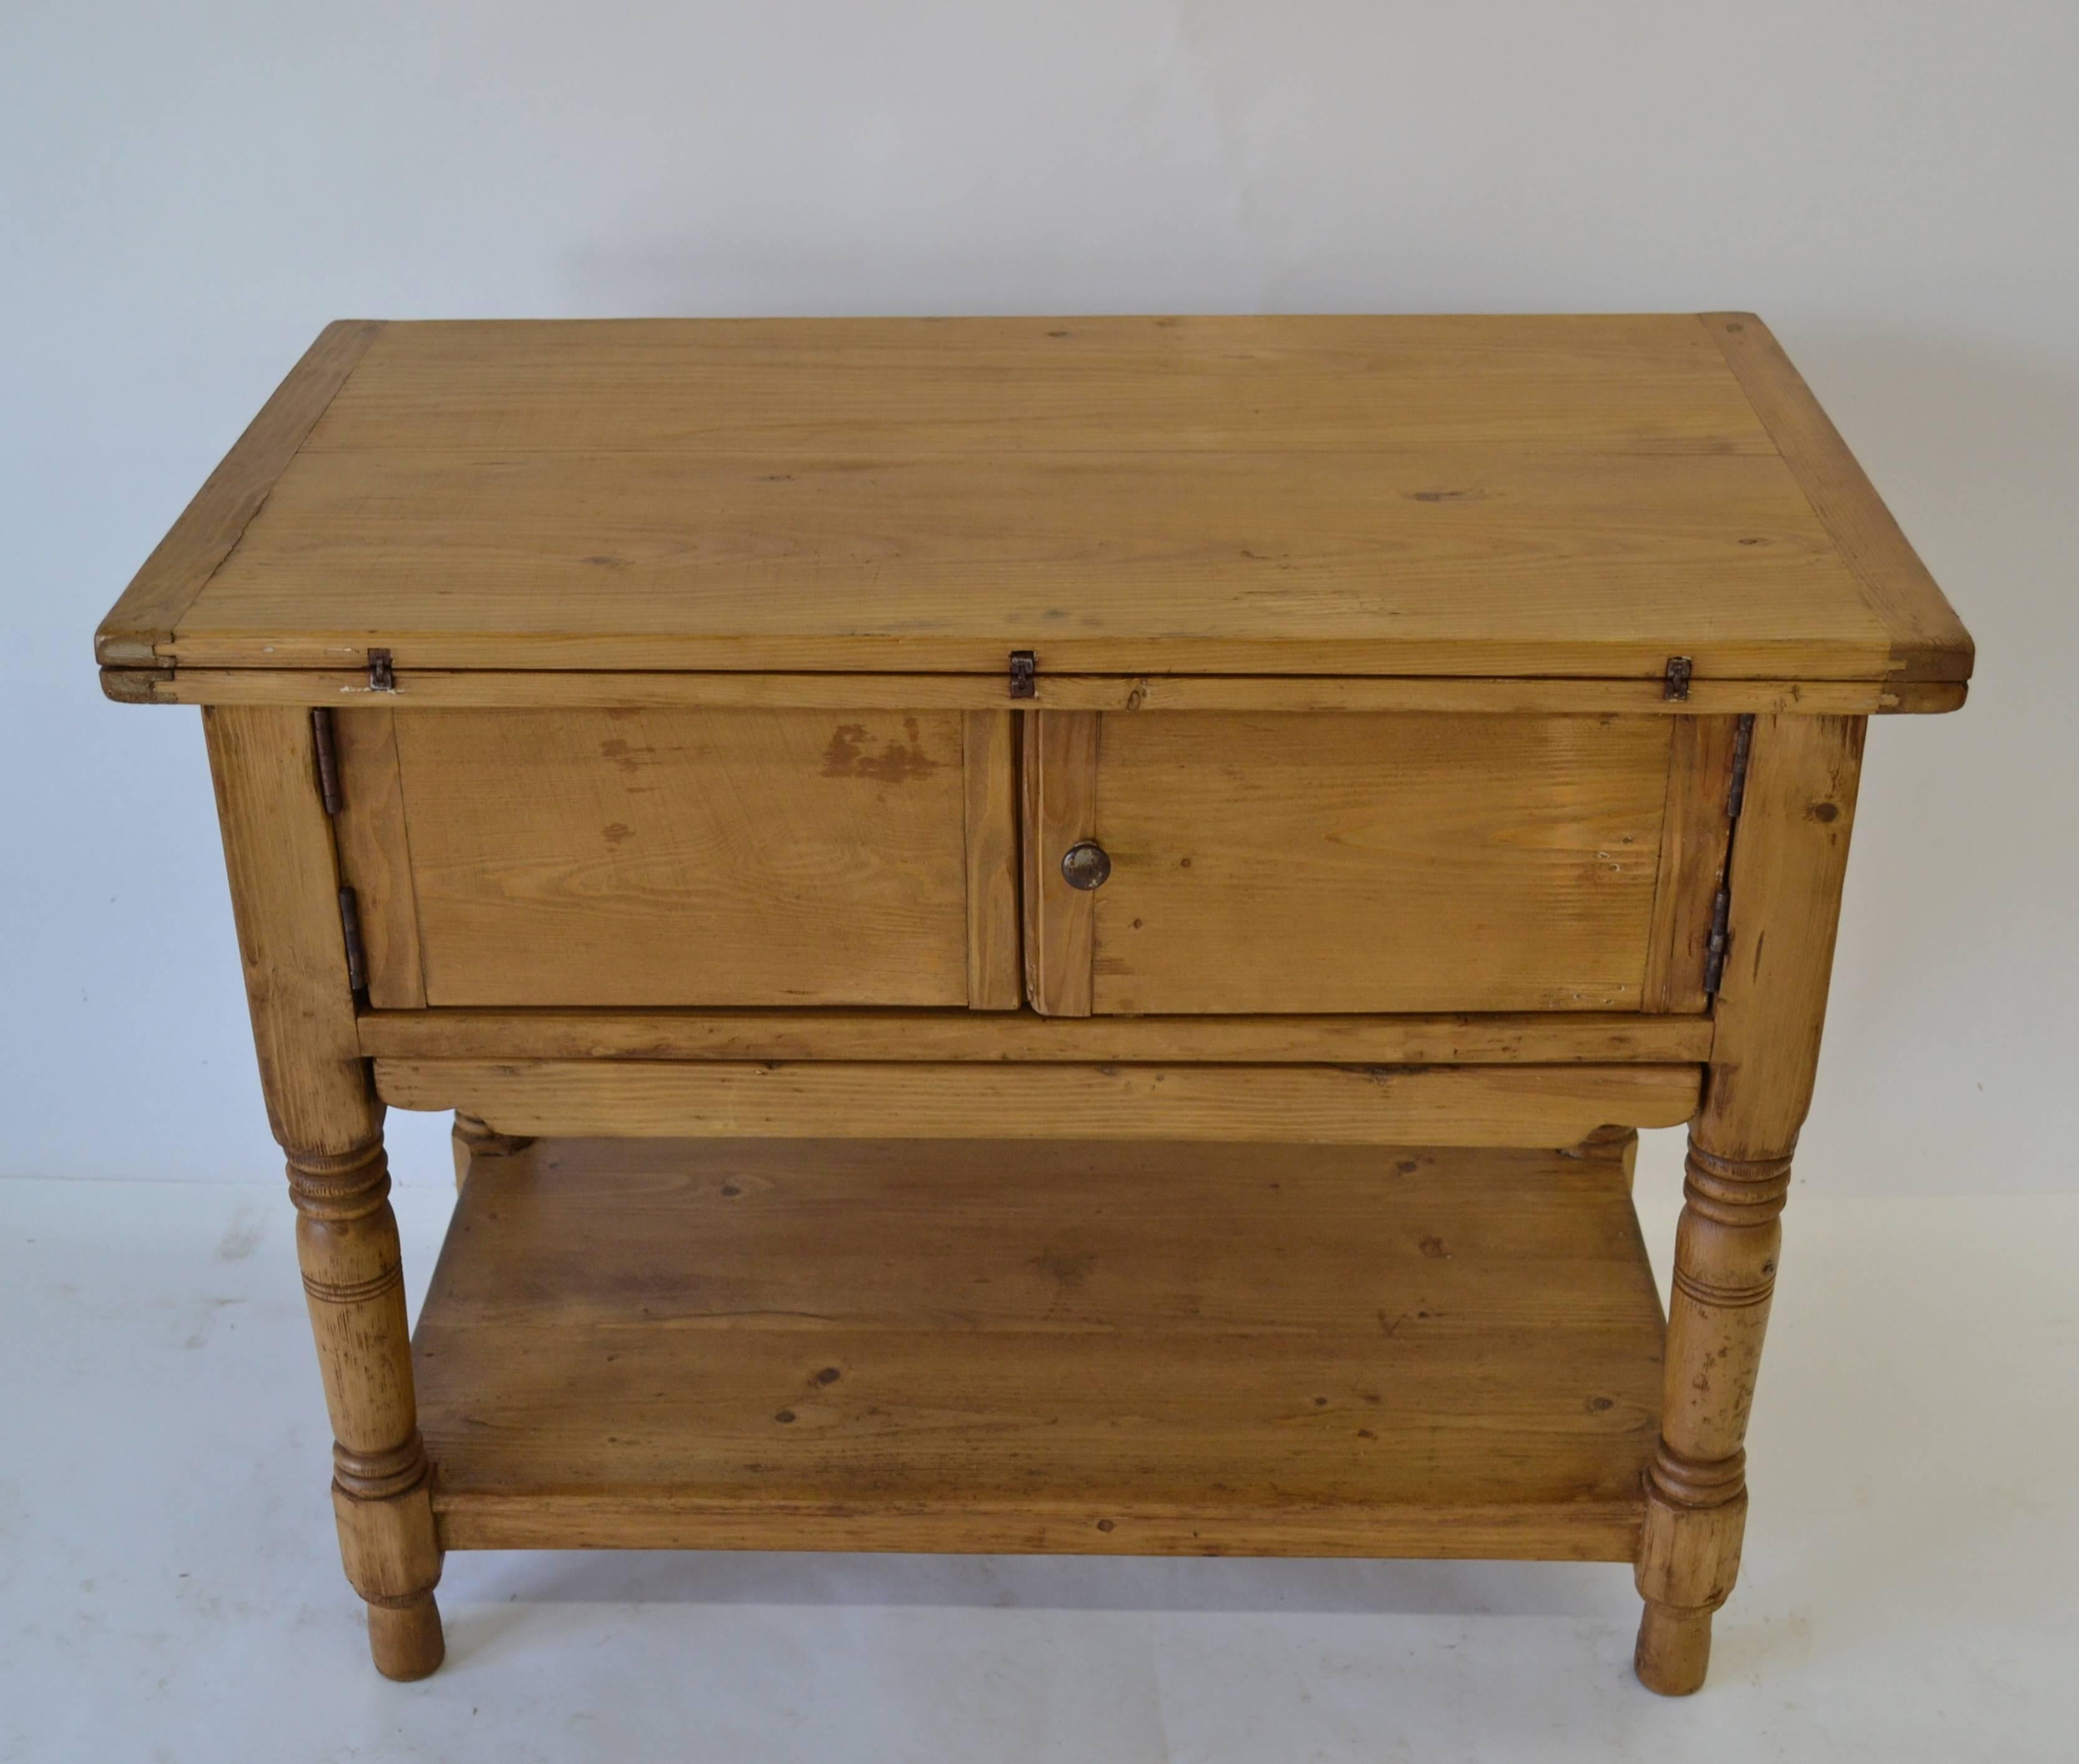 This is a remarkable little self-contained pine laundry table, the first we've seen quite like it, sadly missing its original zinc or enamel basins. Items for washing are gathered on the pull-out pine shelf beneath the cupboard doors. Then you lift